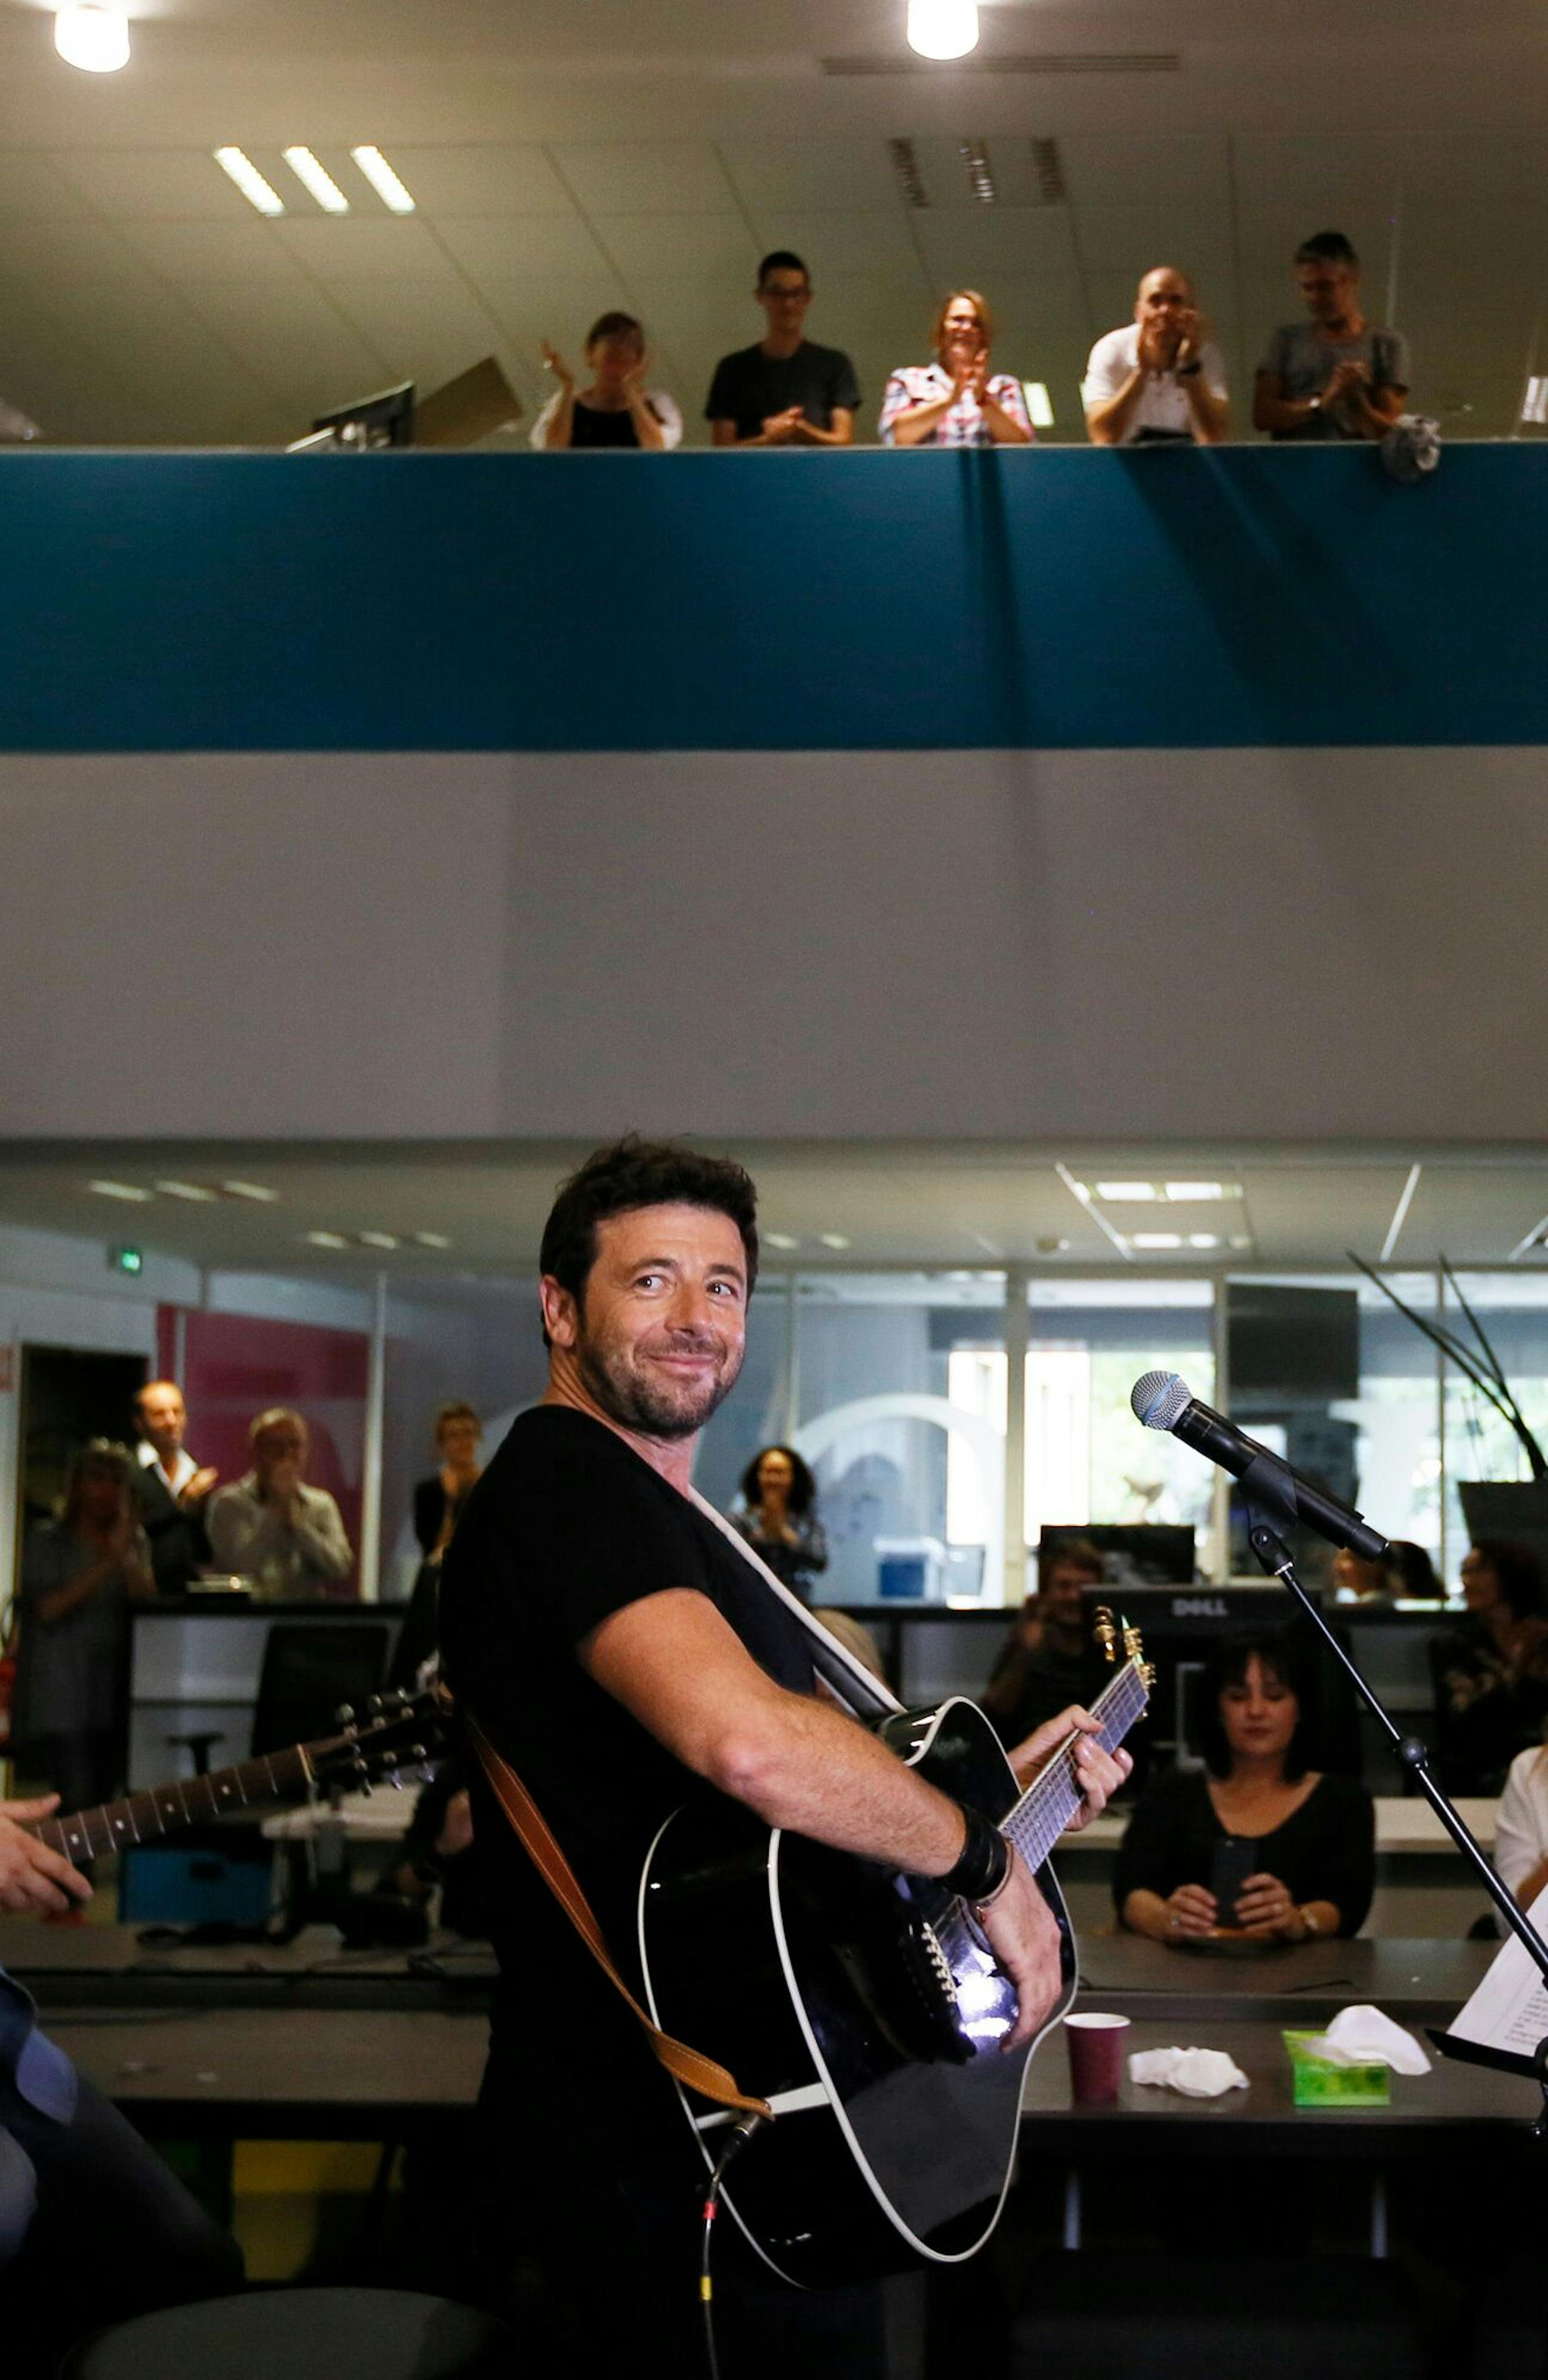 Le Parisien live sessions. The editors invited singer Patrick Bruel to play selections from his latest album in a concert broadcast live on leparisien.fr © Le Parisien/Olivier Corsan